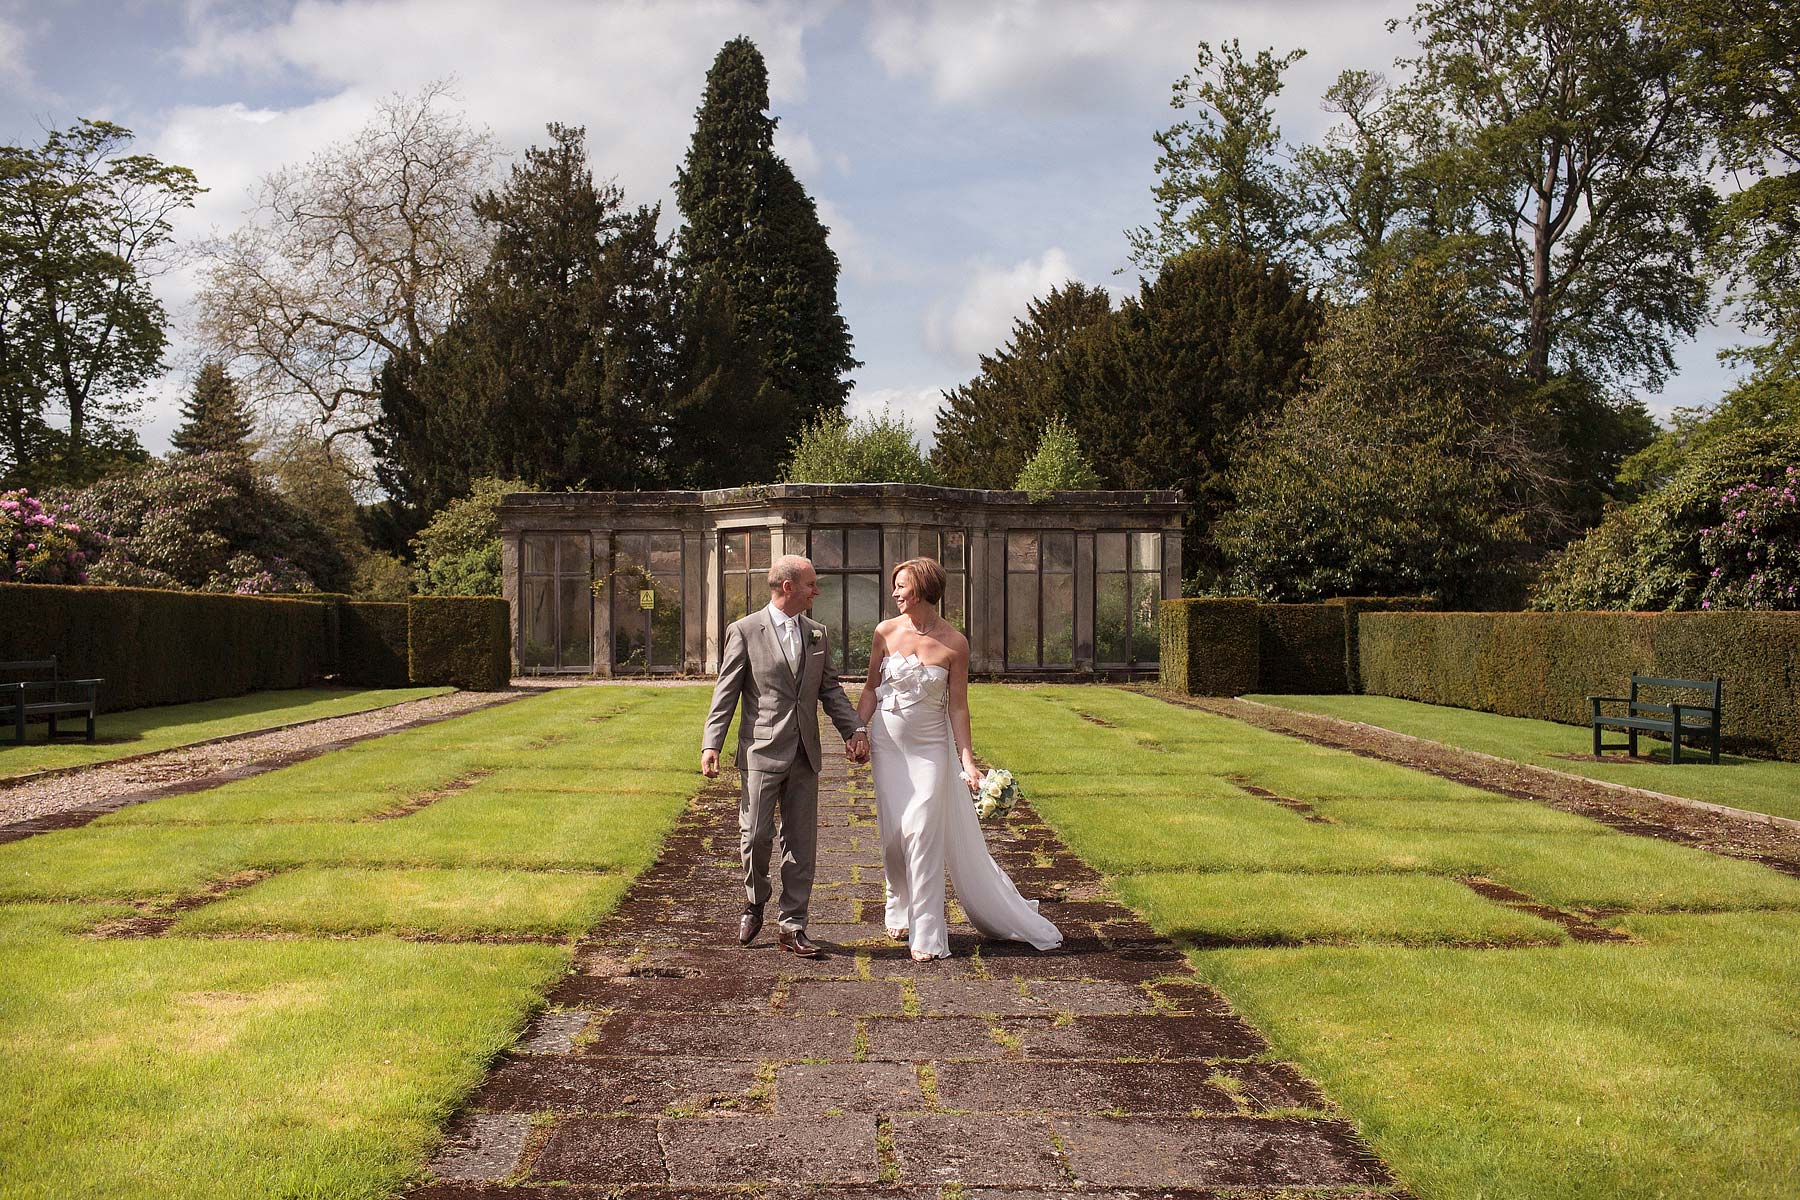 Stunning gardens for Bride and Groom portraits at Sandon Hall in Staffordshire by Venue Preferred Wedding Photographer Stuart James